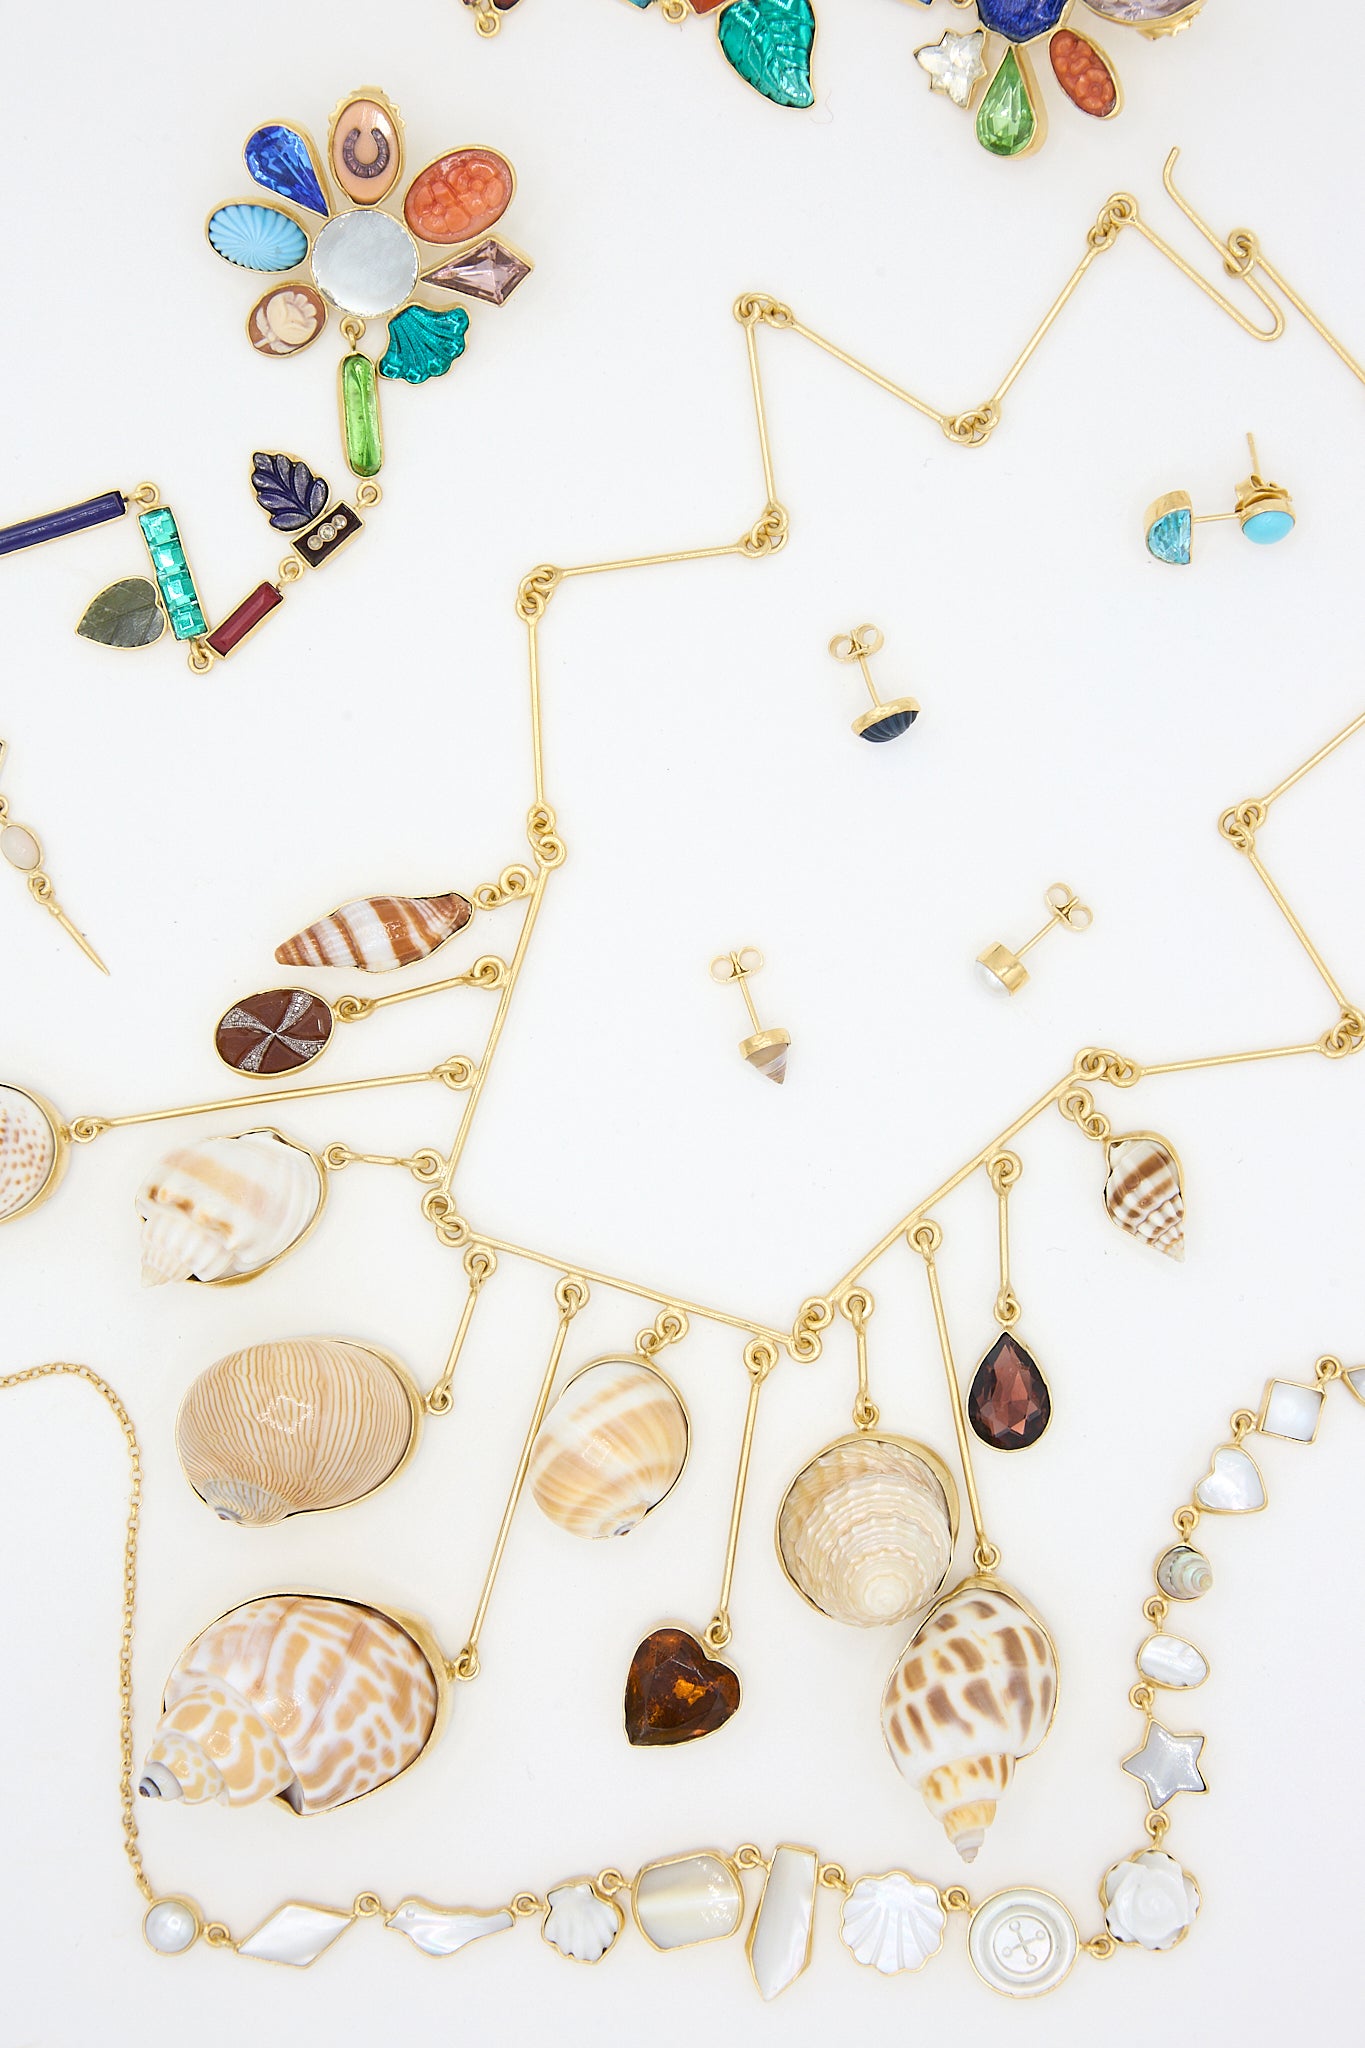 A collection of Grainne Morton 18k gold-plated silver Wire Charm Drop Necklaces, earrings, and shells.